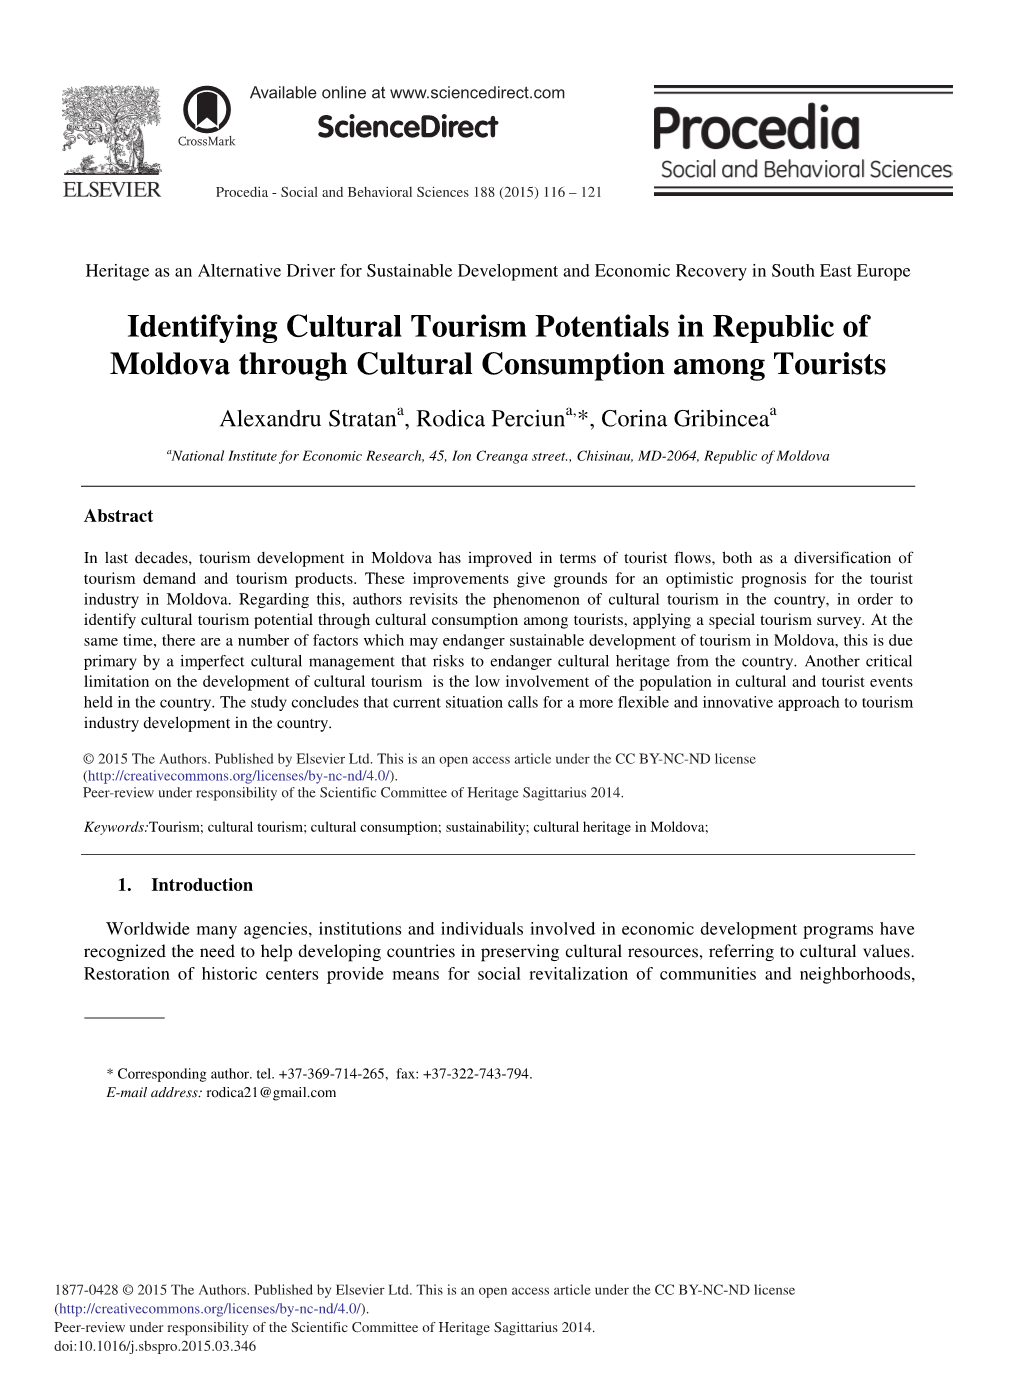 Identifying Cultural Tourism Potentials in Republic of Moldova Through Cultural Consumption Among Tourists